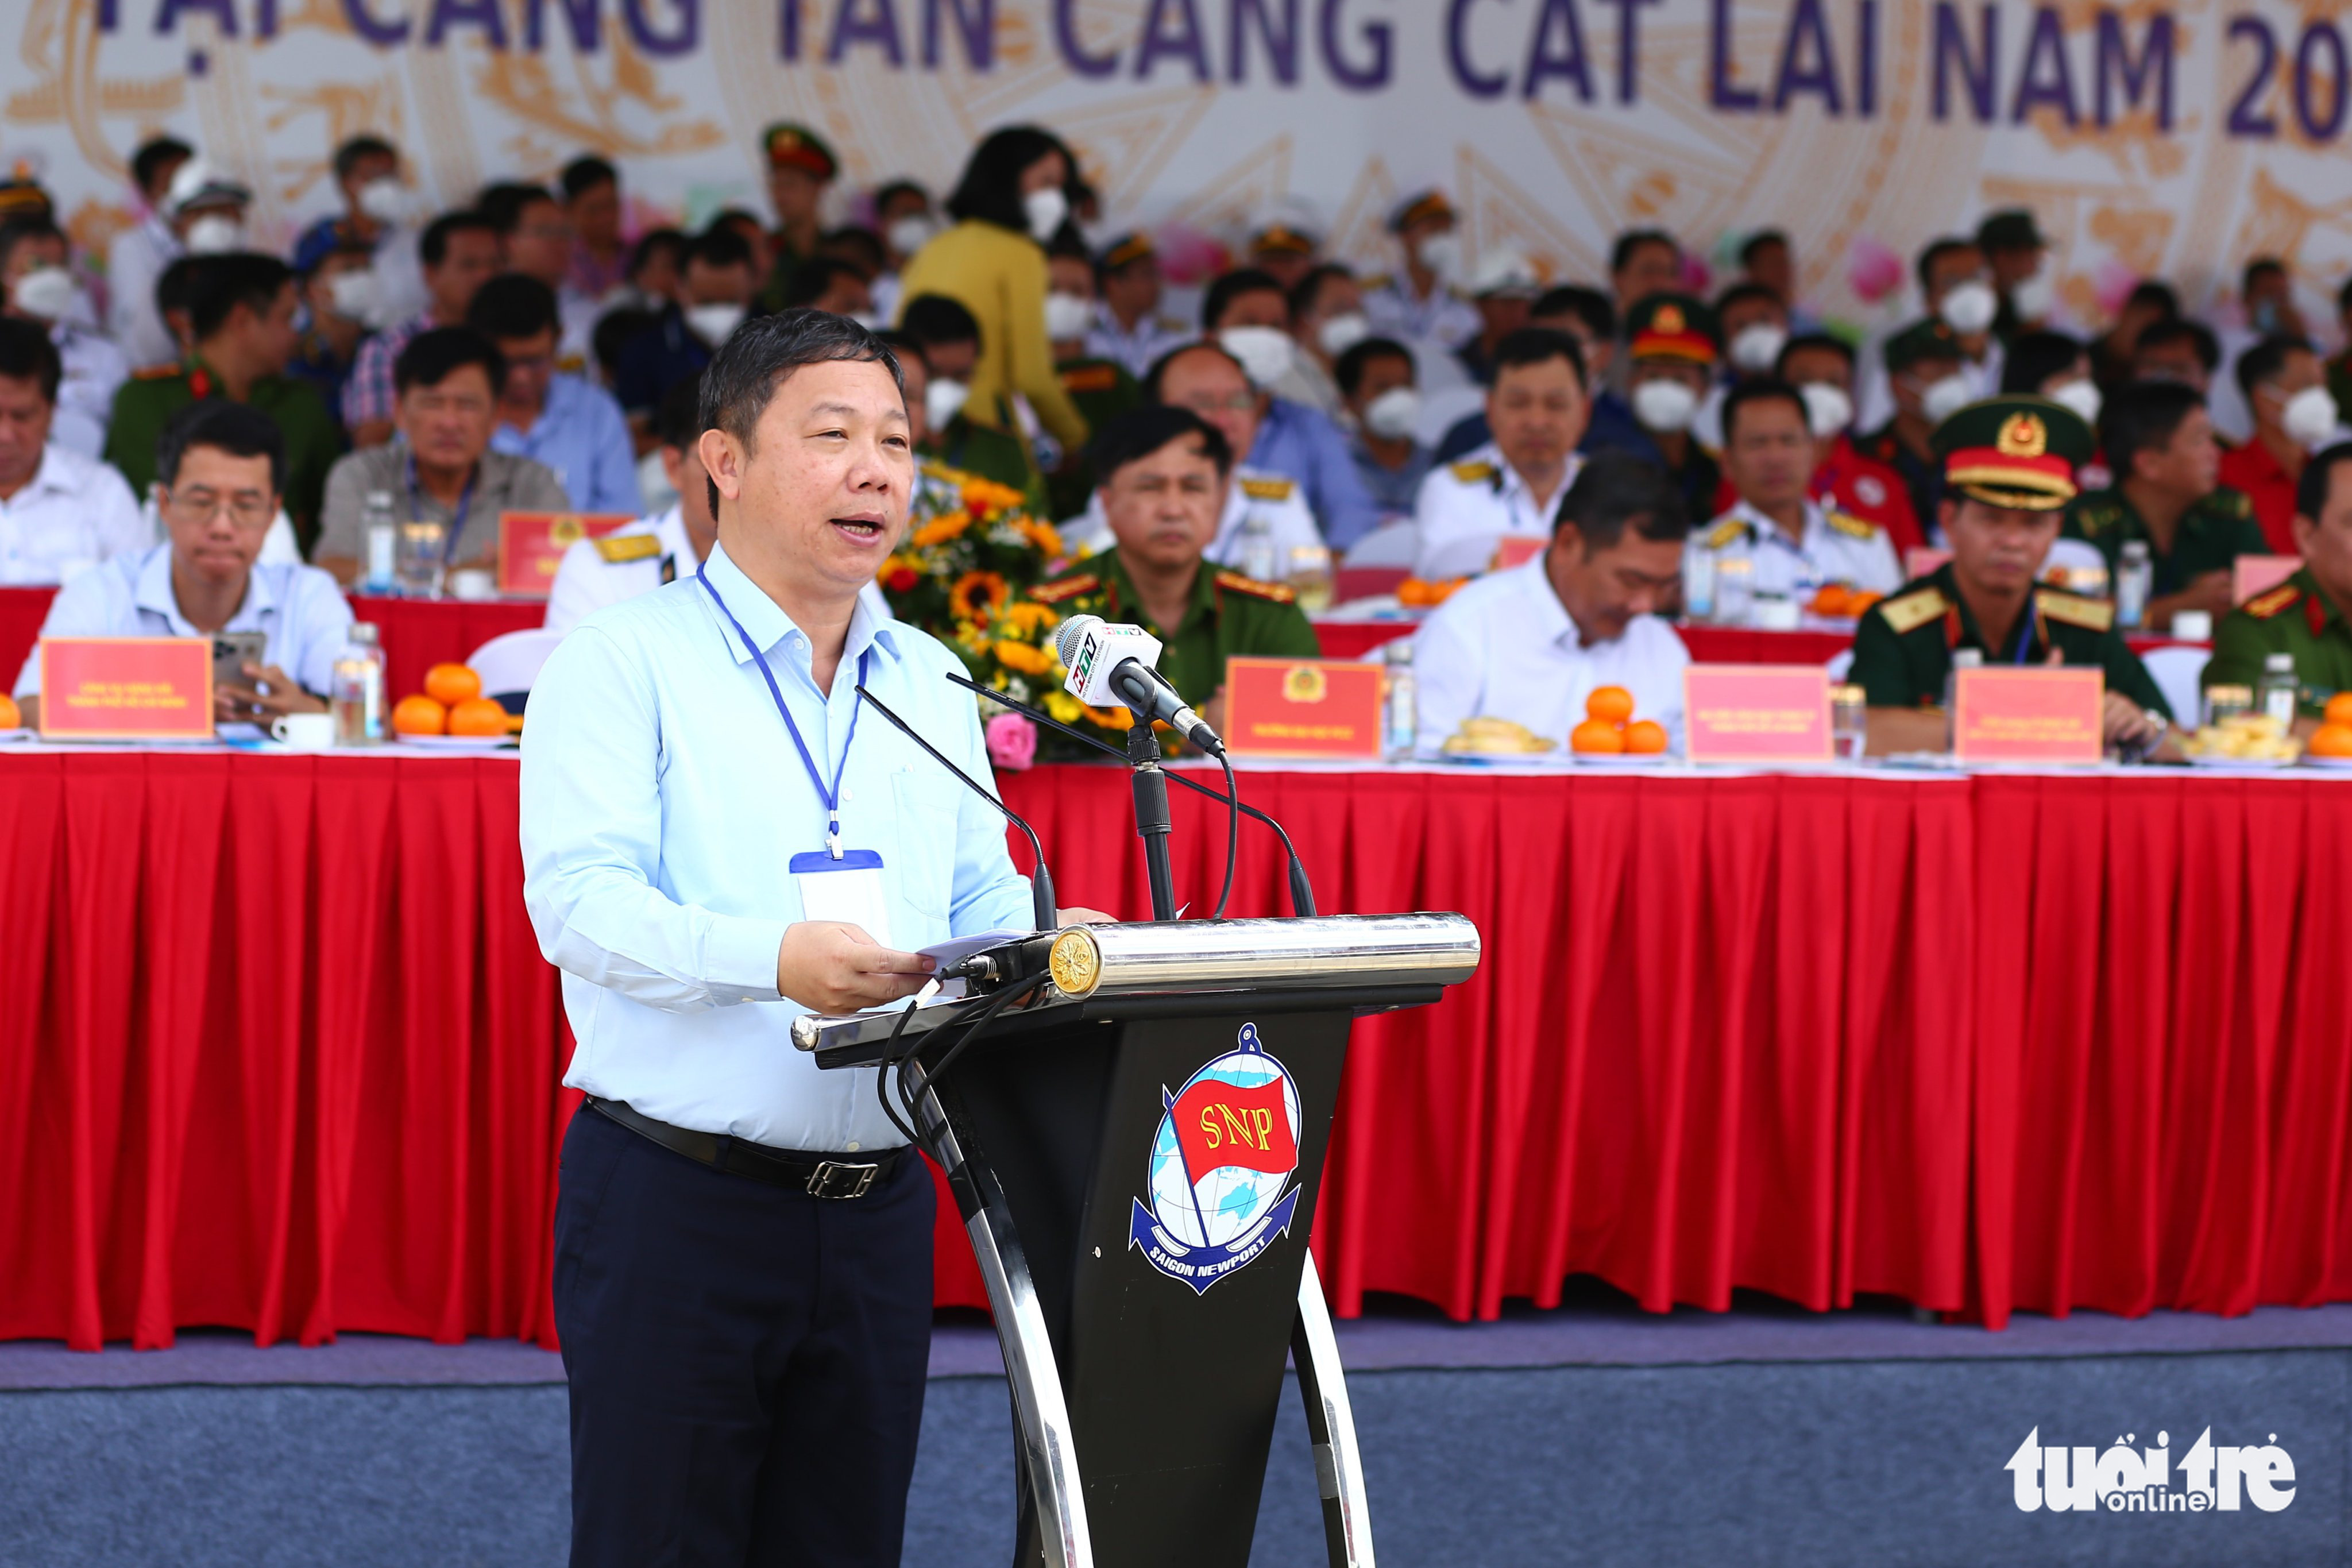 Vice-chairman of the Ho Chi Minh City People’s Committee Duong Anh Duc speaks prior to the fire drill at Cat Lai Port in Ho Chi Minh City, September 24, 2022. Photo: Le An / Tuoi Tre